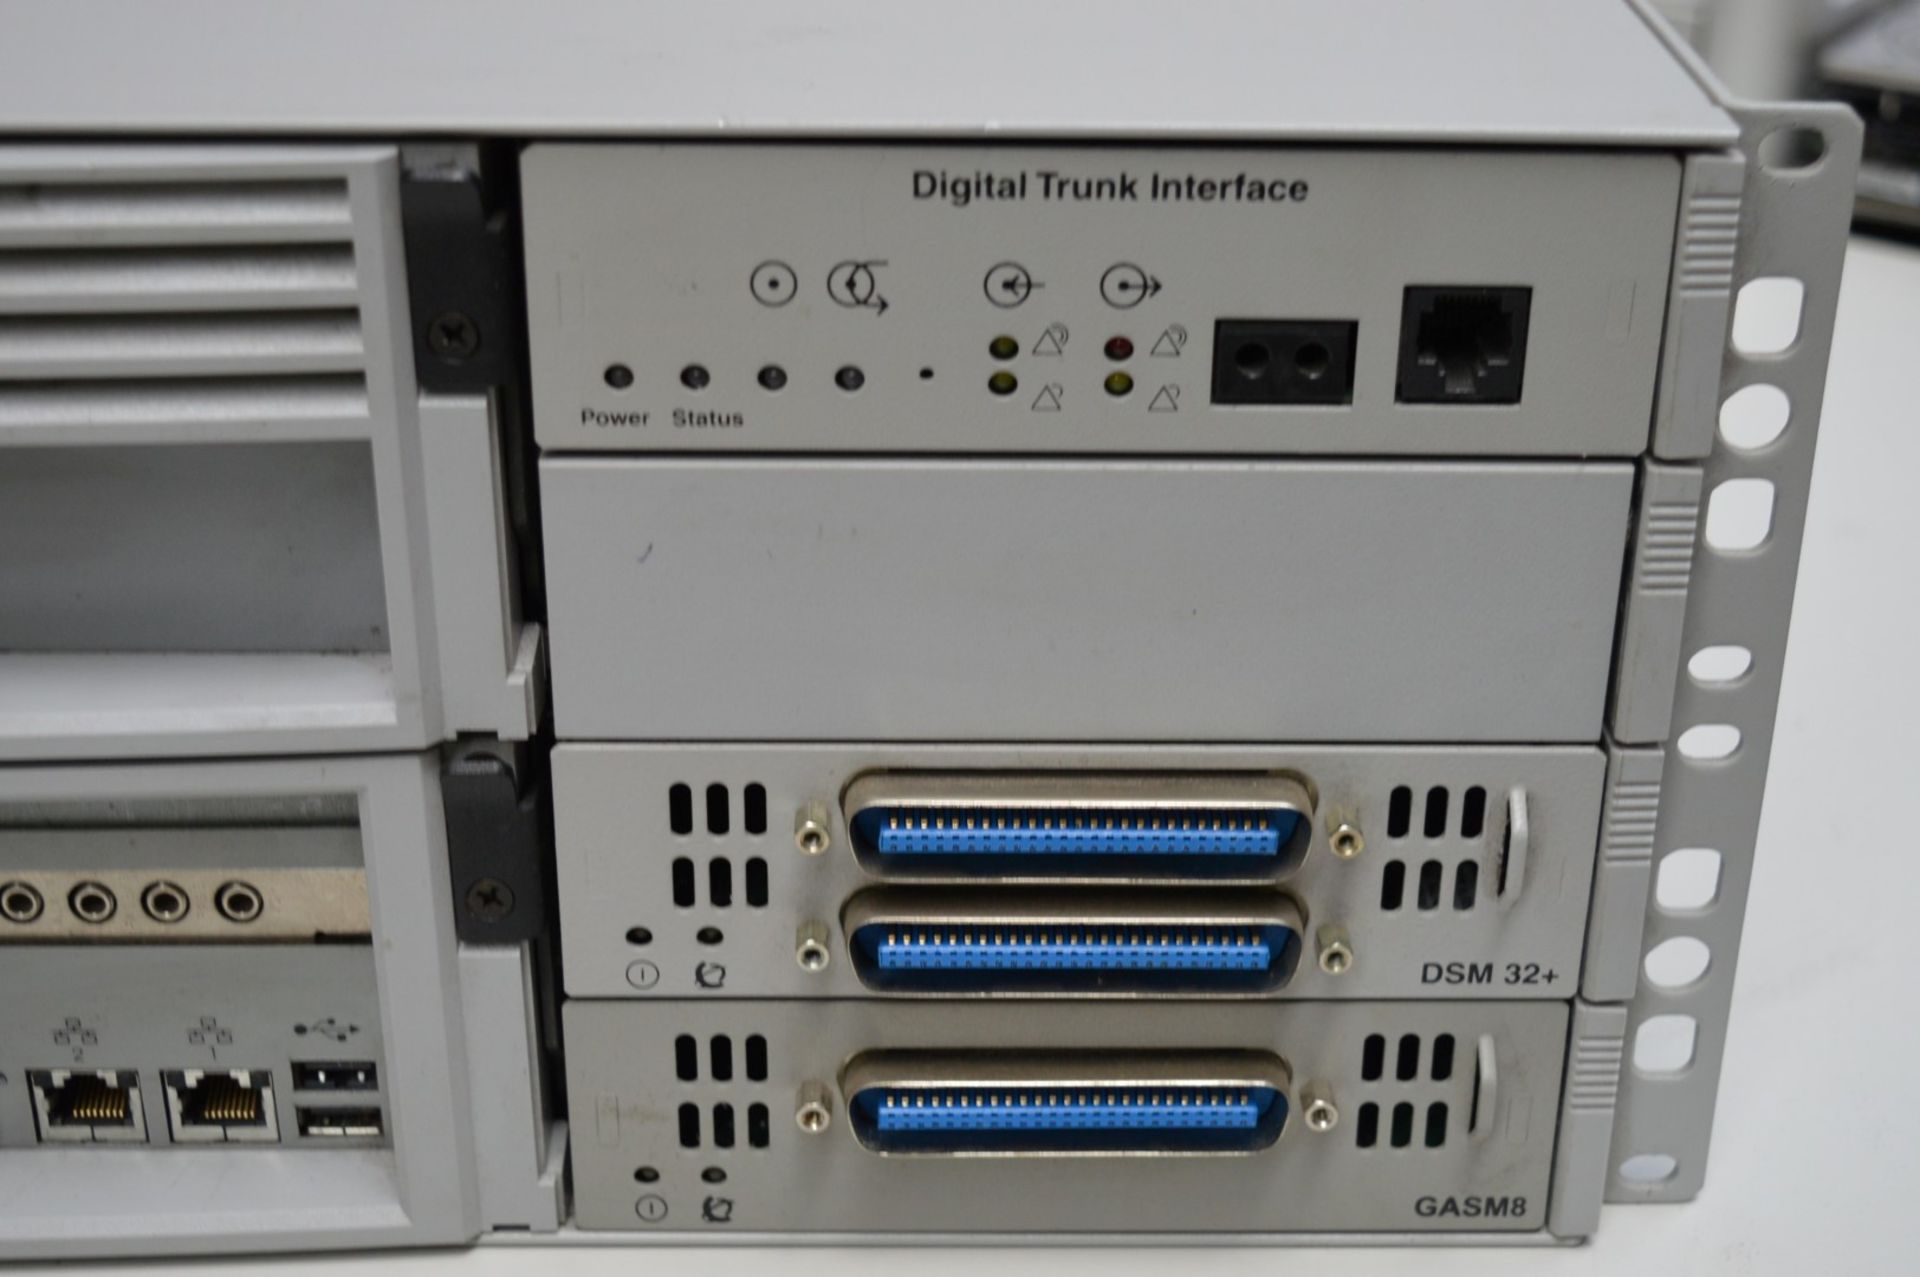 1 x Nortel Business Communication Manager BCM 400 with Digital Truck Interface, GASM8 Card ad DSM - Image 6 of 8